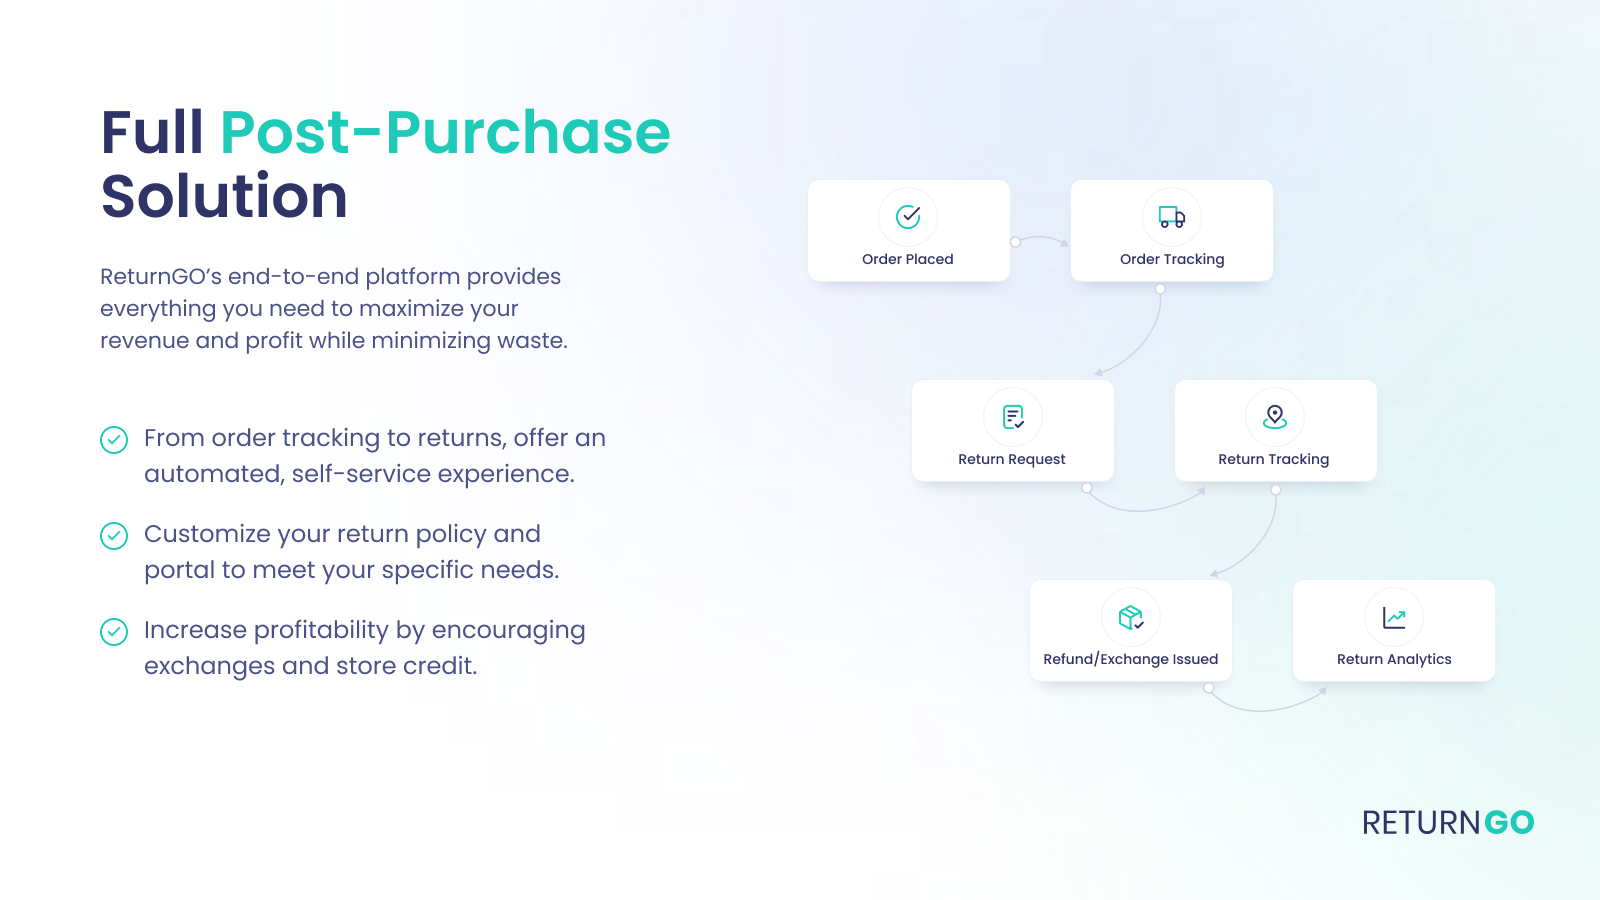 Post-purchase process steps